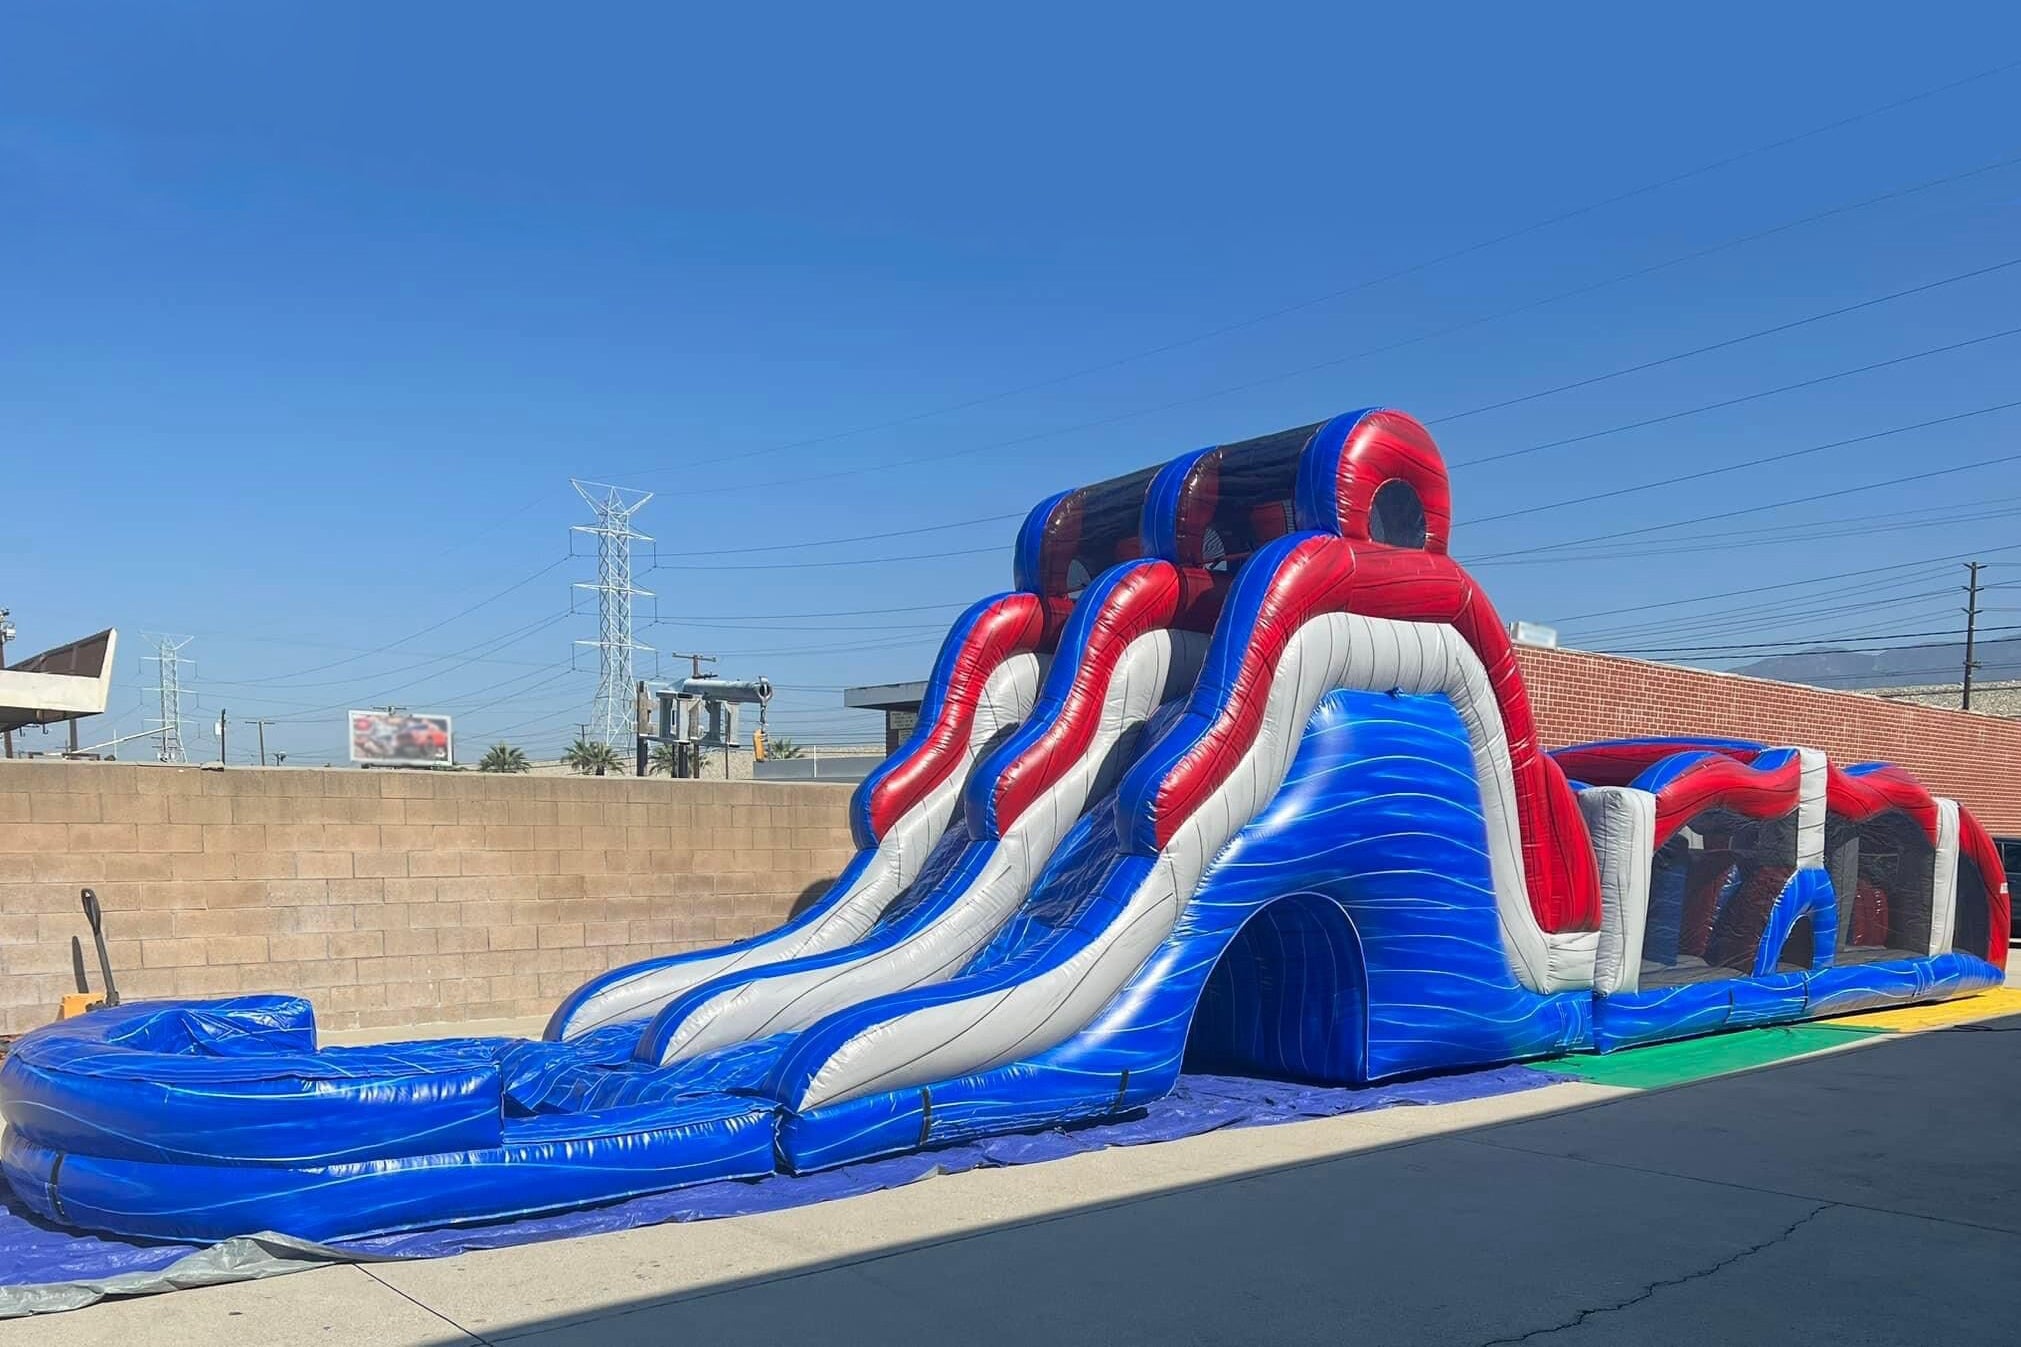 Inflatable Assault Course Near Me Nerf Obstacle Course Water Slide Blast Outdoor For Adults Competition Retro Pool